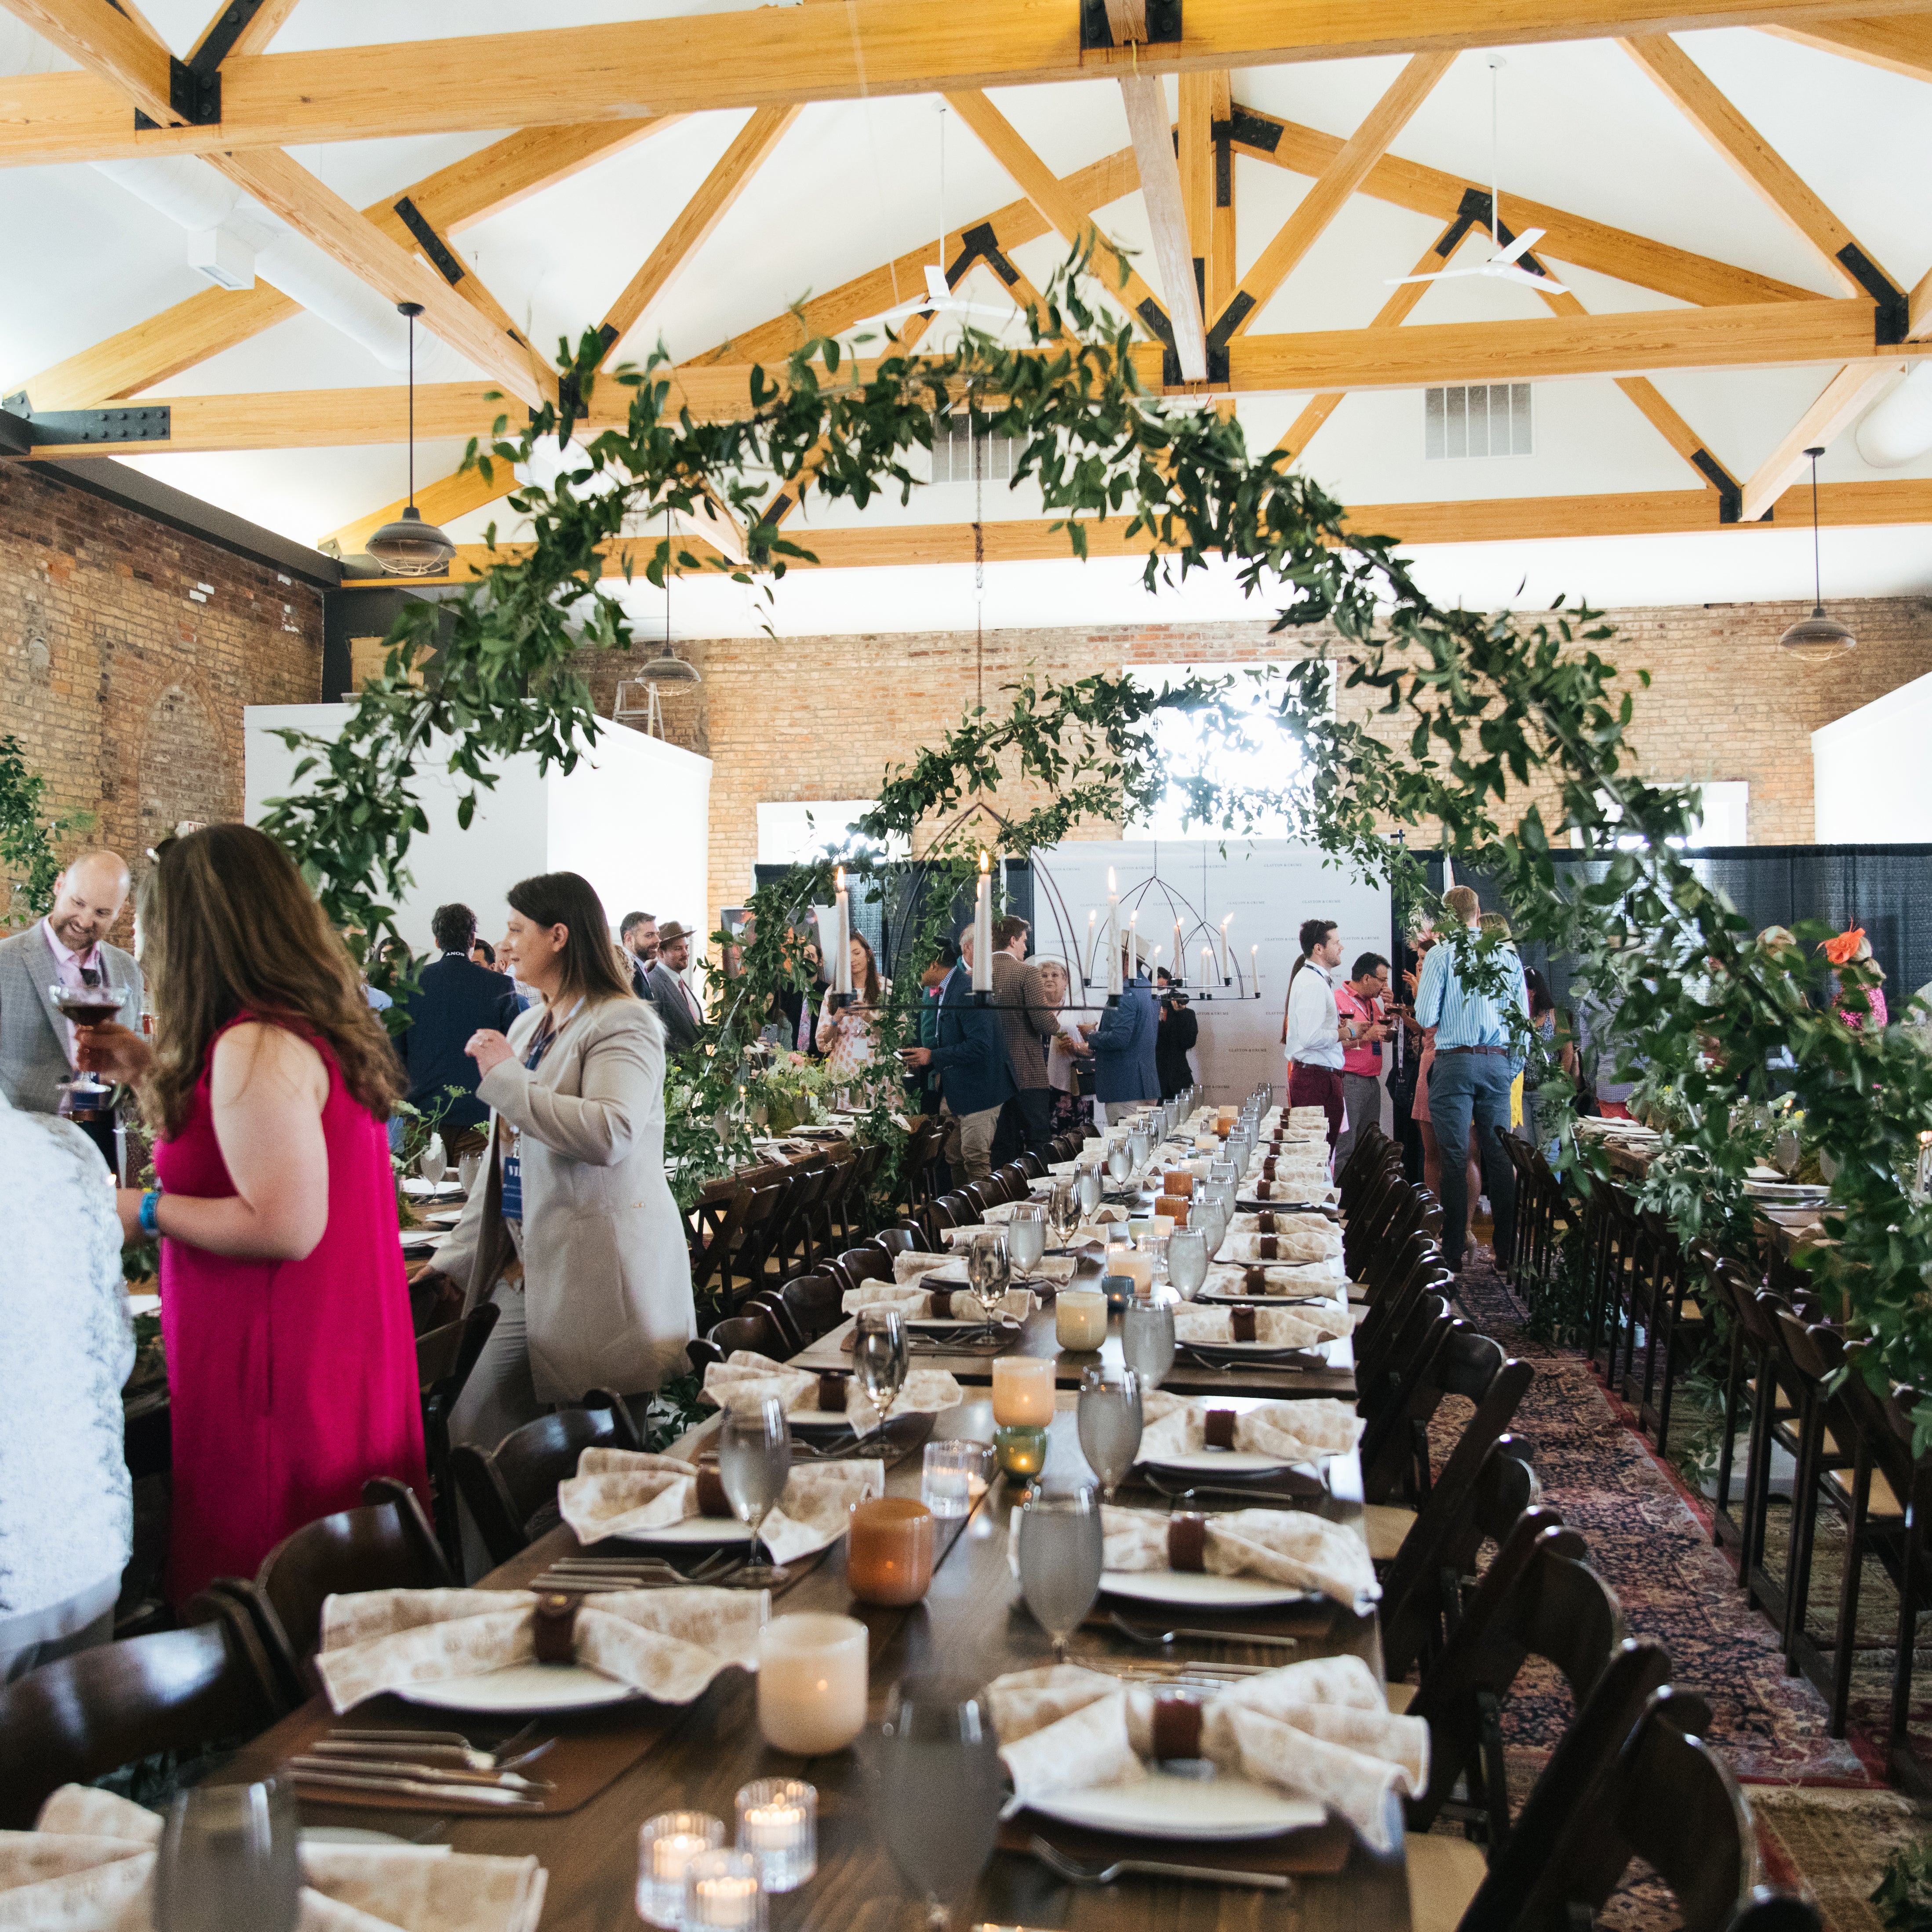 The Second Annual Clayton & Crume X Maker’s Mark Oaks Day Brunch